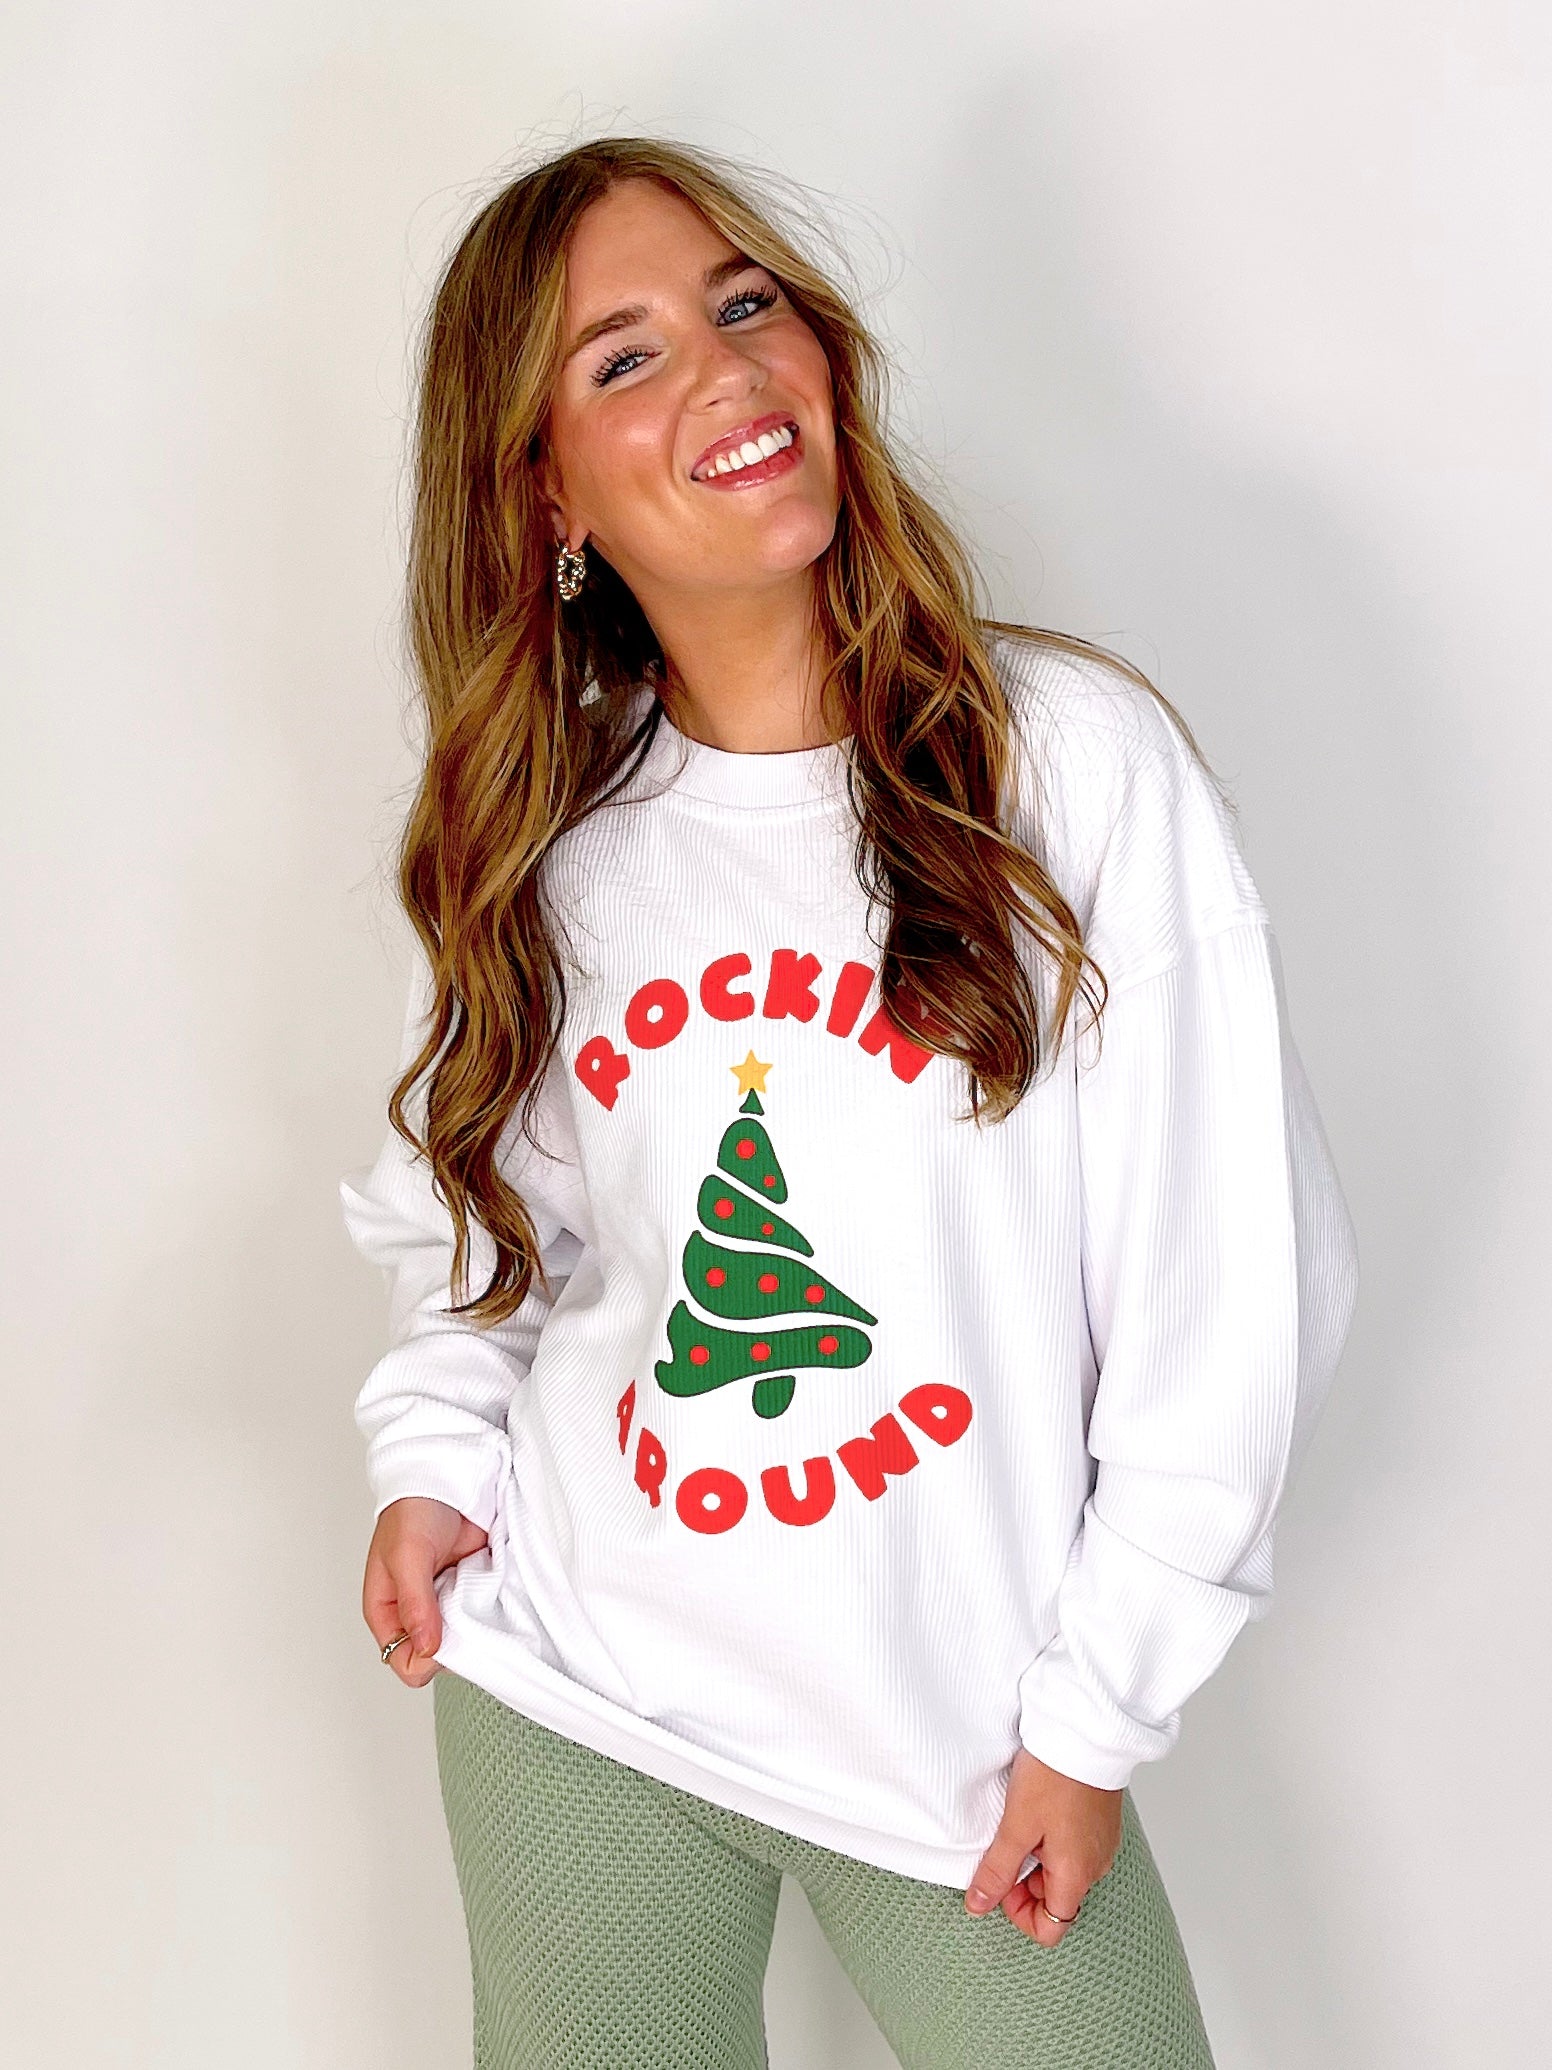 Rockin' Around Corded Sweatshirt-Sweatshirt-Charlie Southern-The Village Shoppe, Women’s Fashion Boutique, Shop Online and In Store - Located in Muscle Shoals, AL.